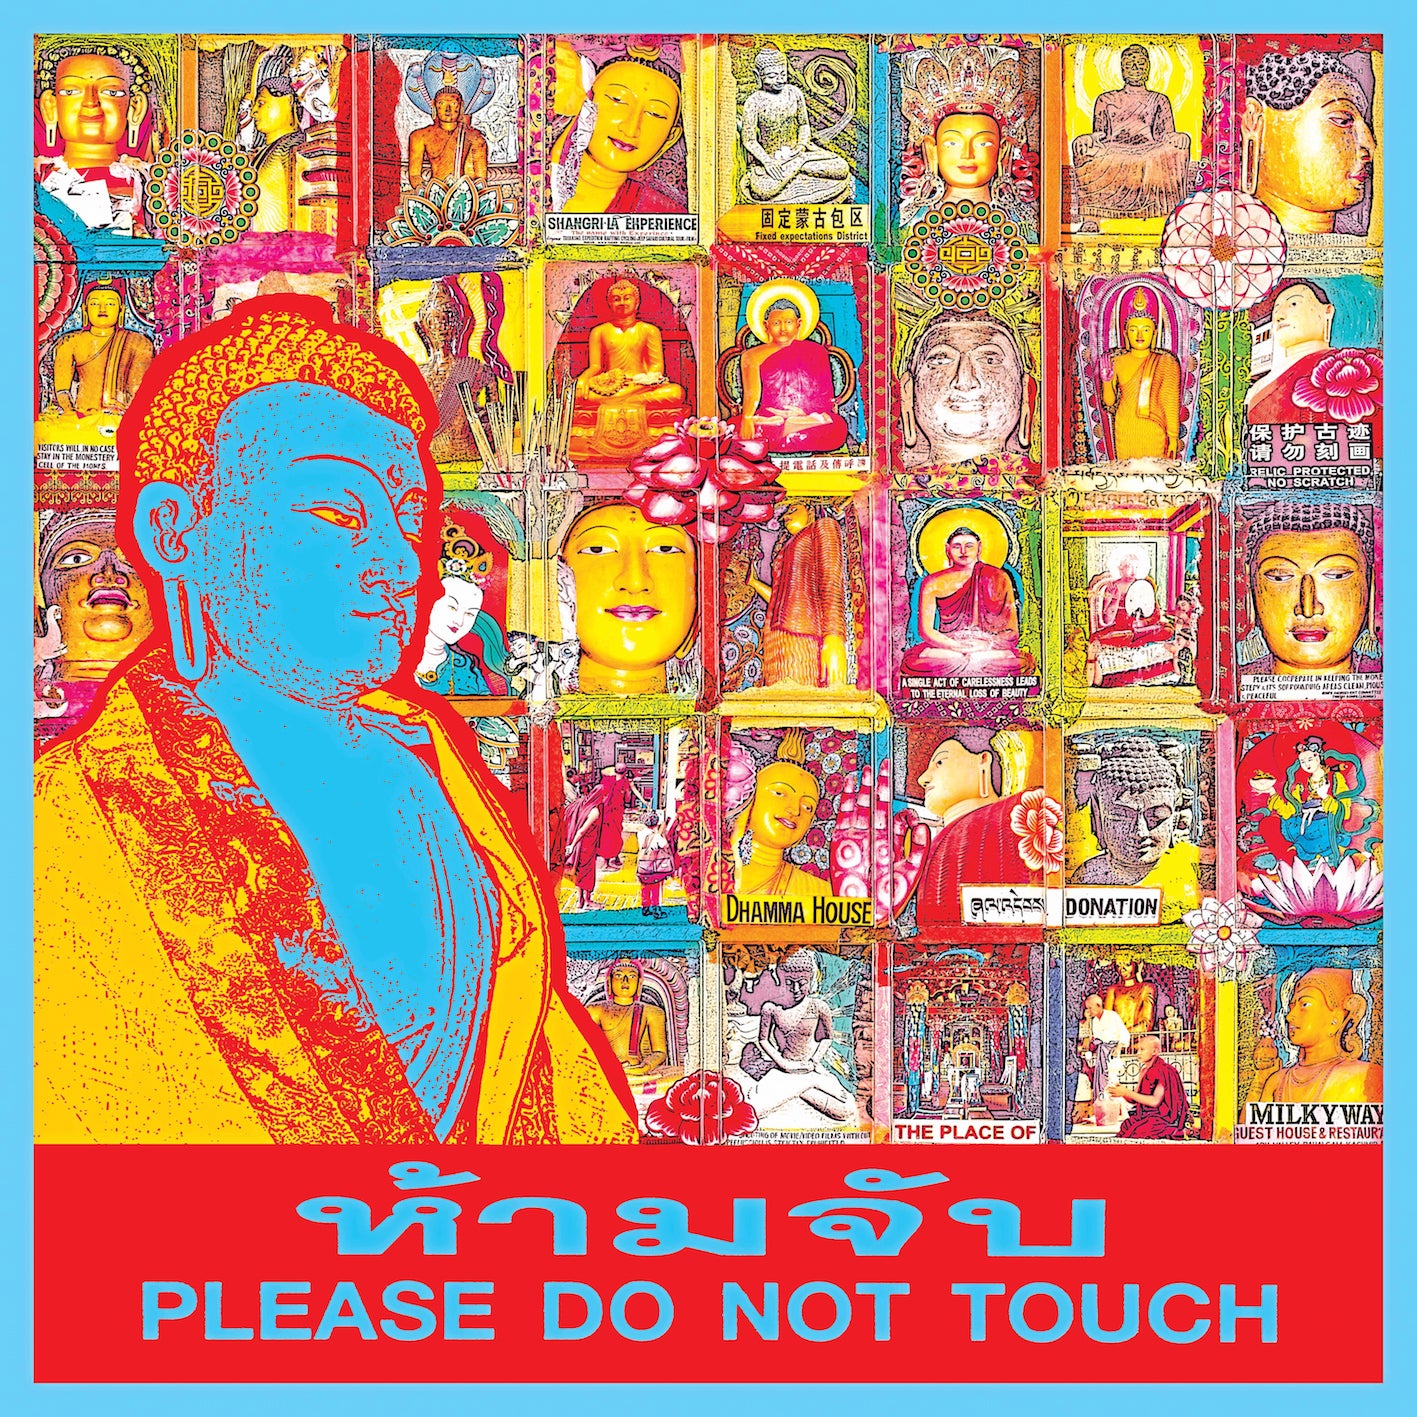 PLEASE DO NOT TOUCH THE BUDDHA